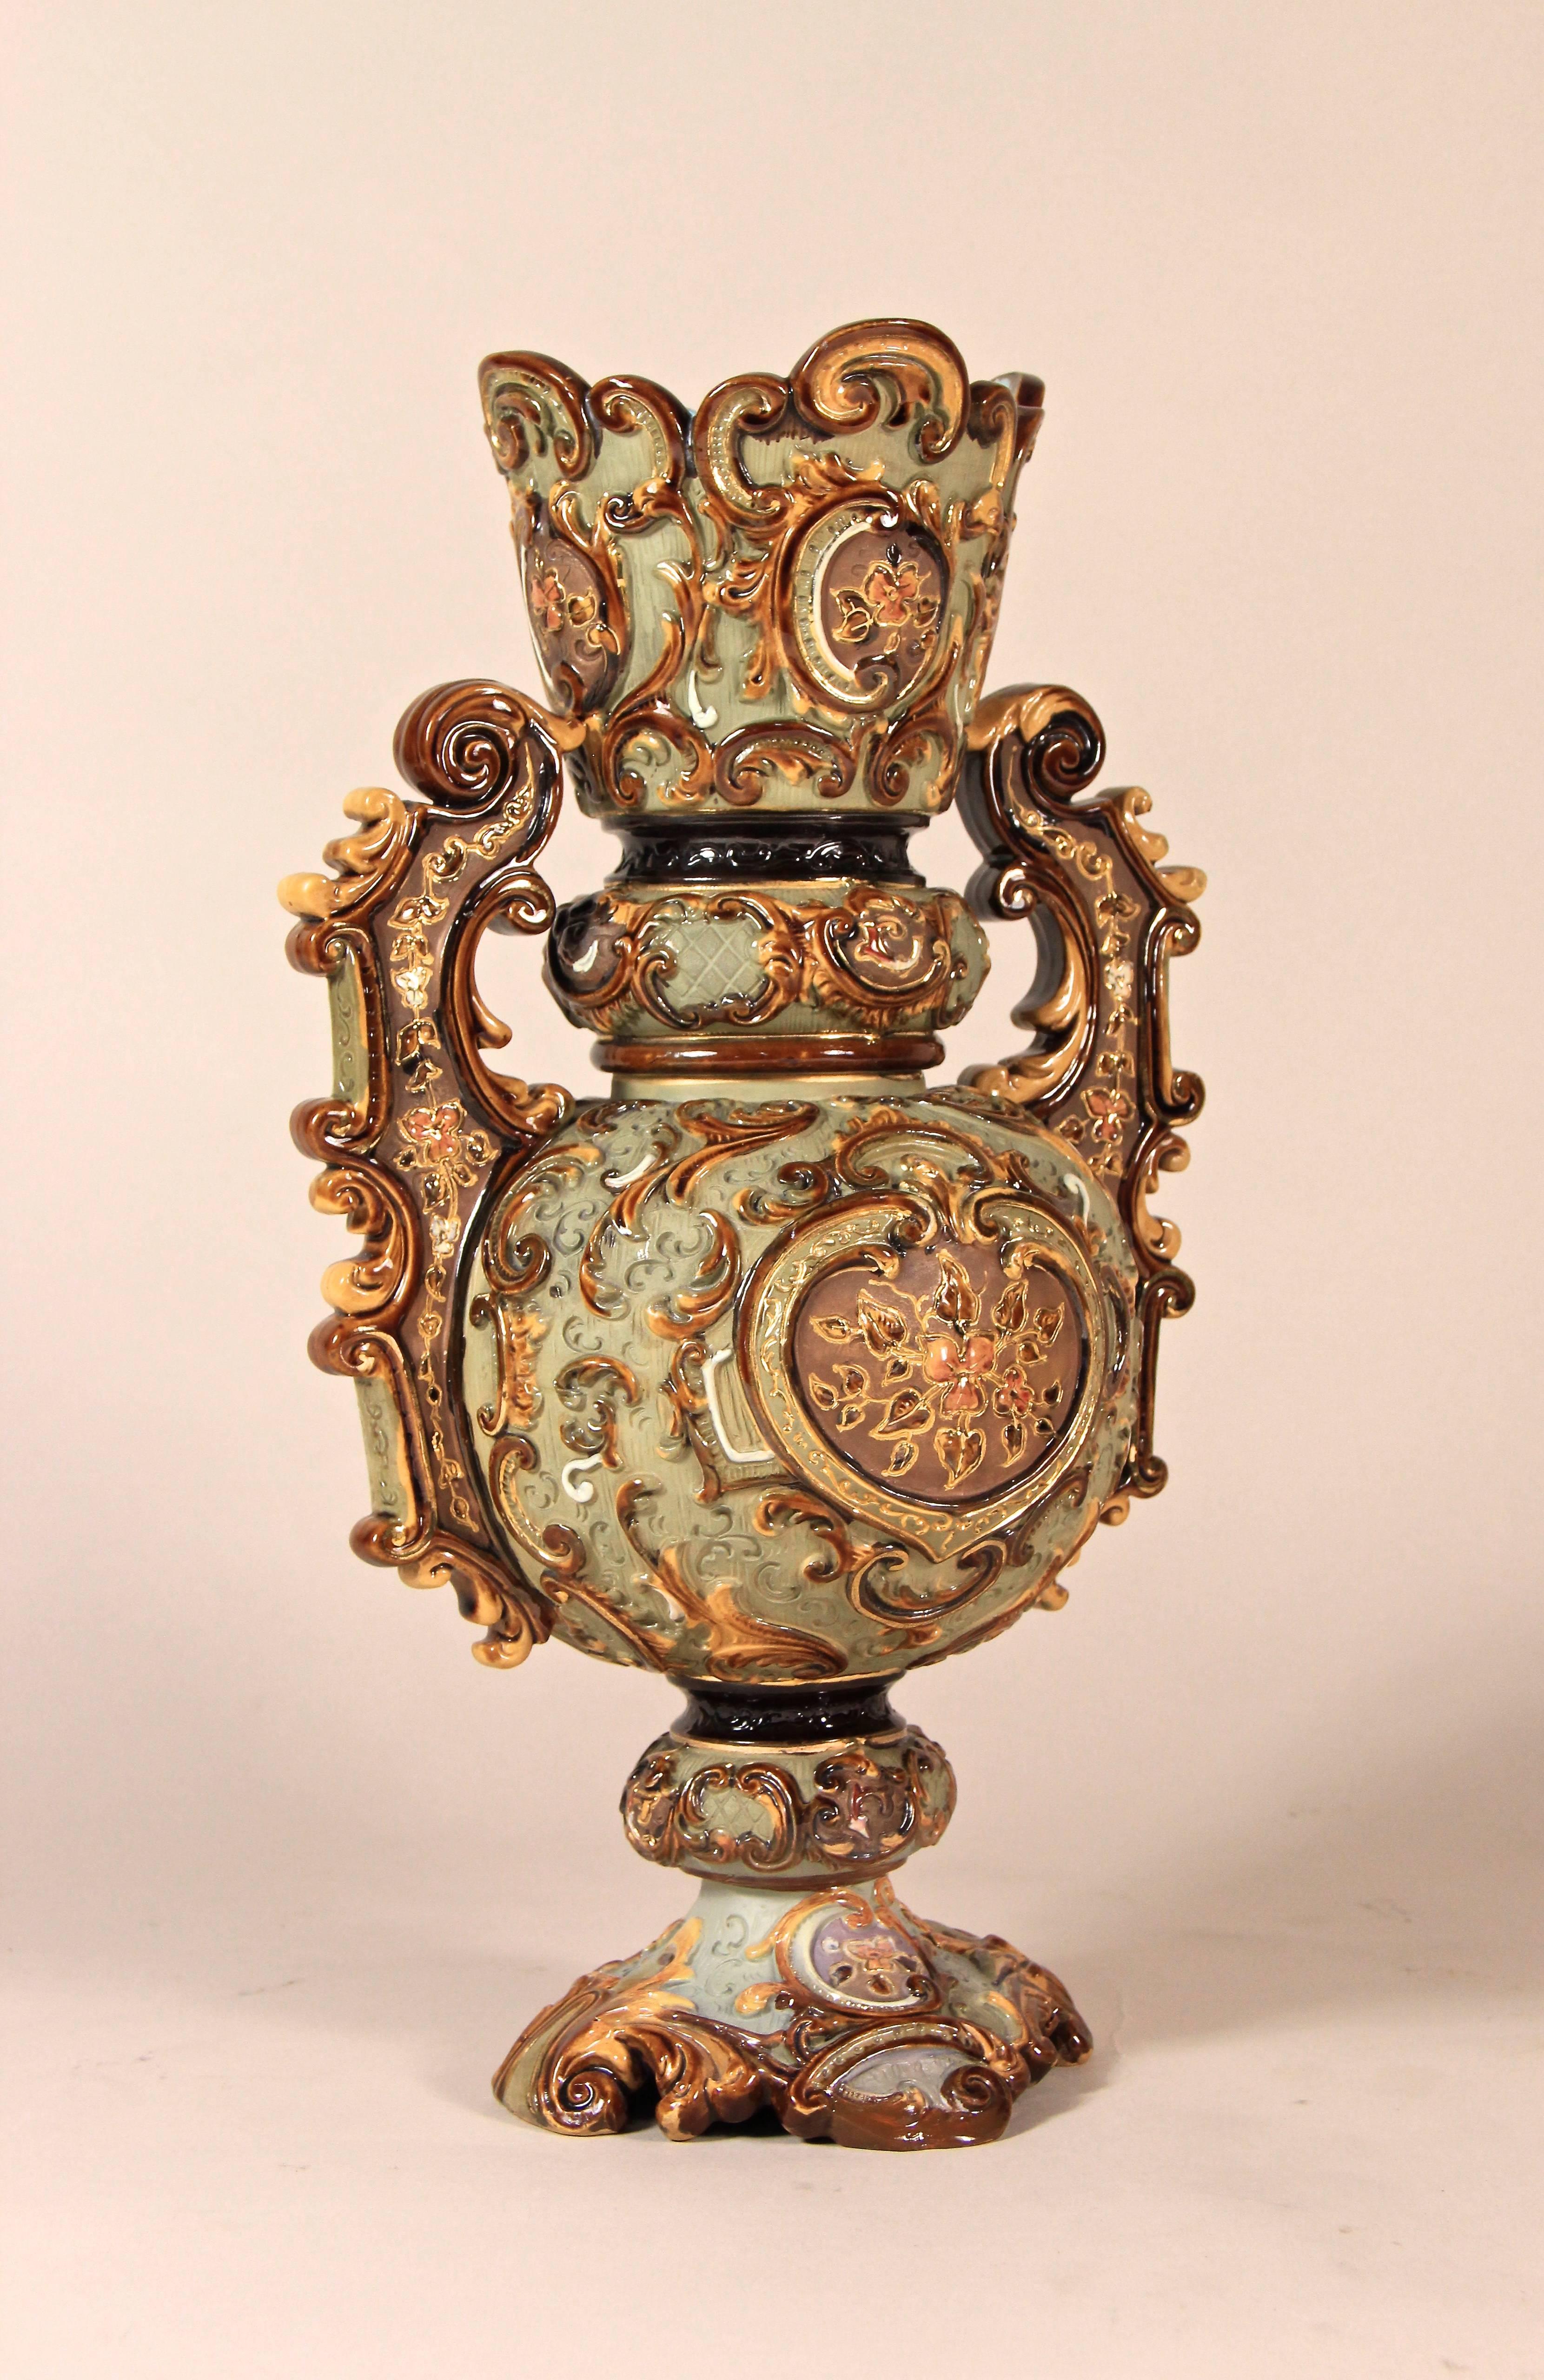 From the world famous Majolica manufacture Wilhelm Schiller & Son in former Bohemia comes this fine Majolica vase in an absolute perfect restored condition. The amazing Majolica vase was made around 1890 in perfection with highest attention to